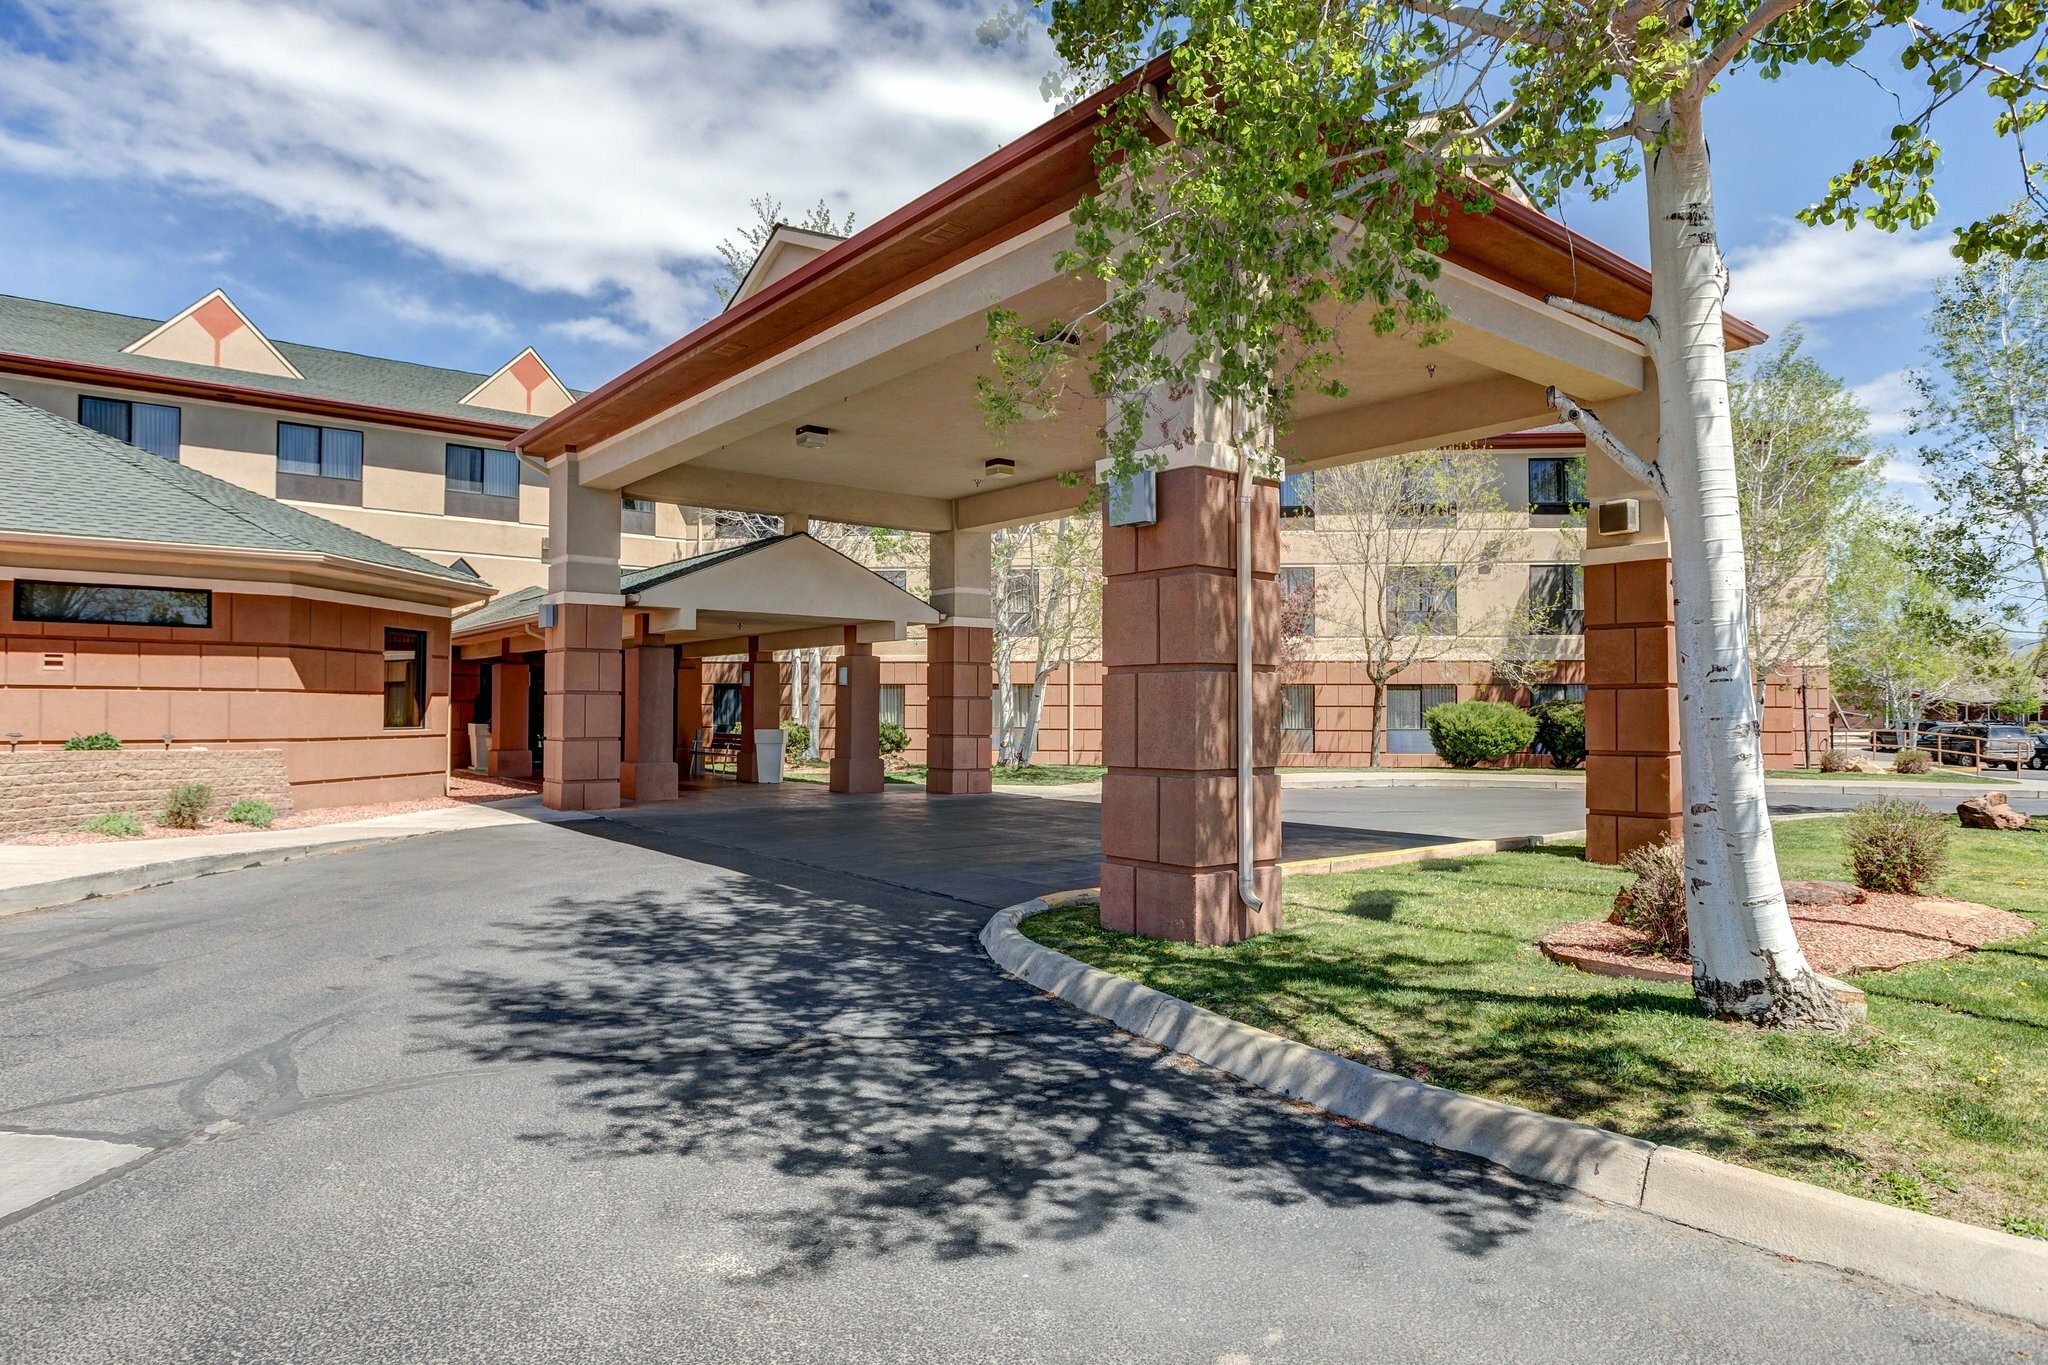 Photo of Holiday Inn Express Hotel & Suites Montrose, Montrose, CO